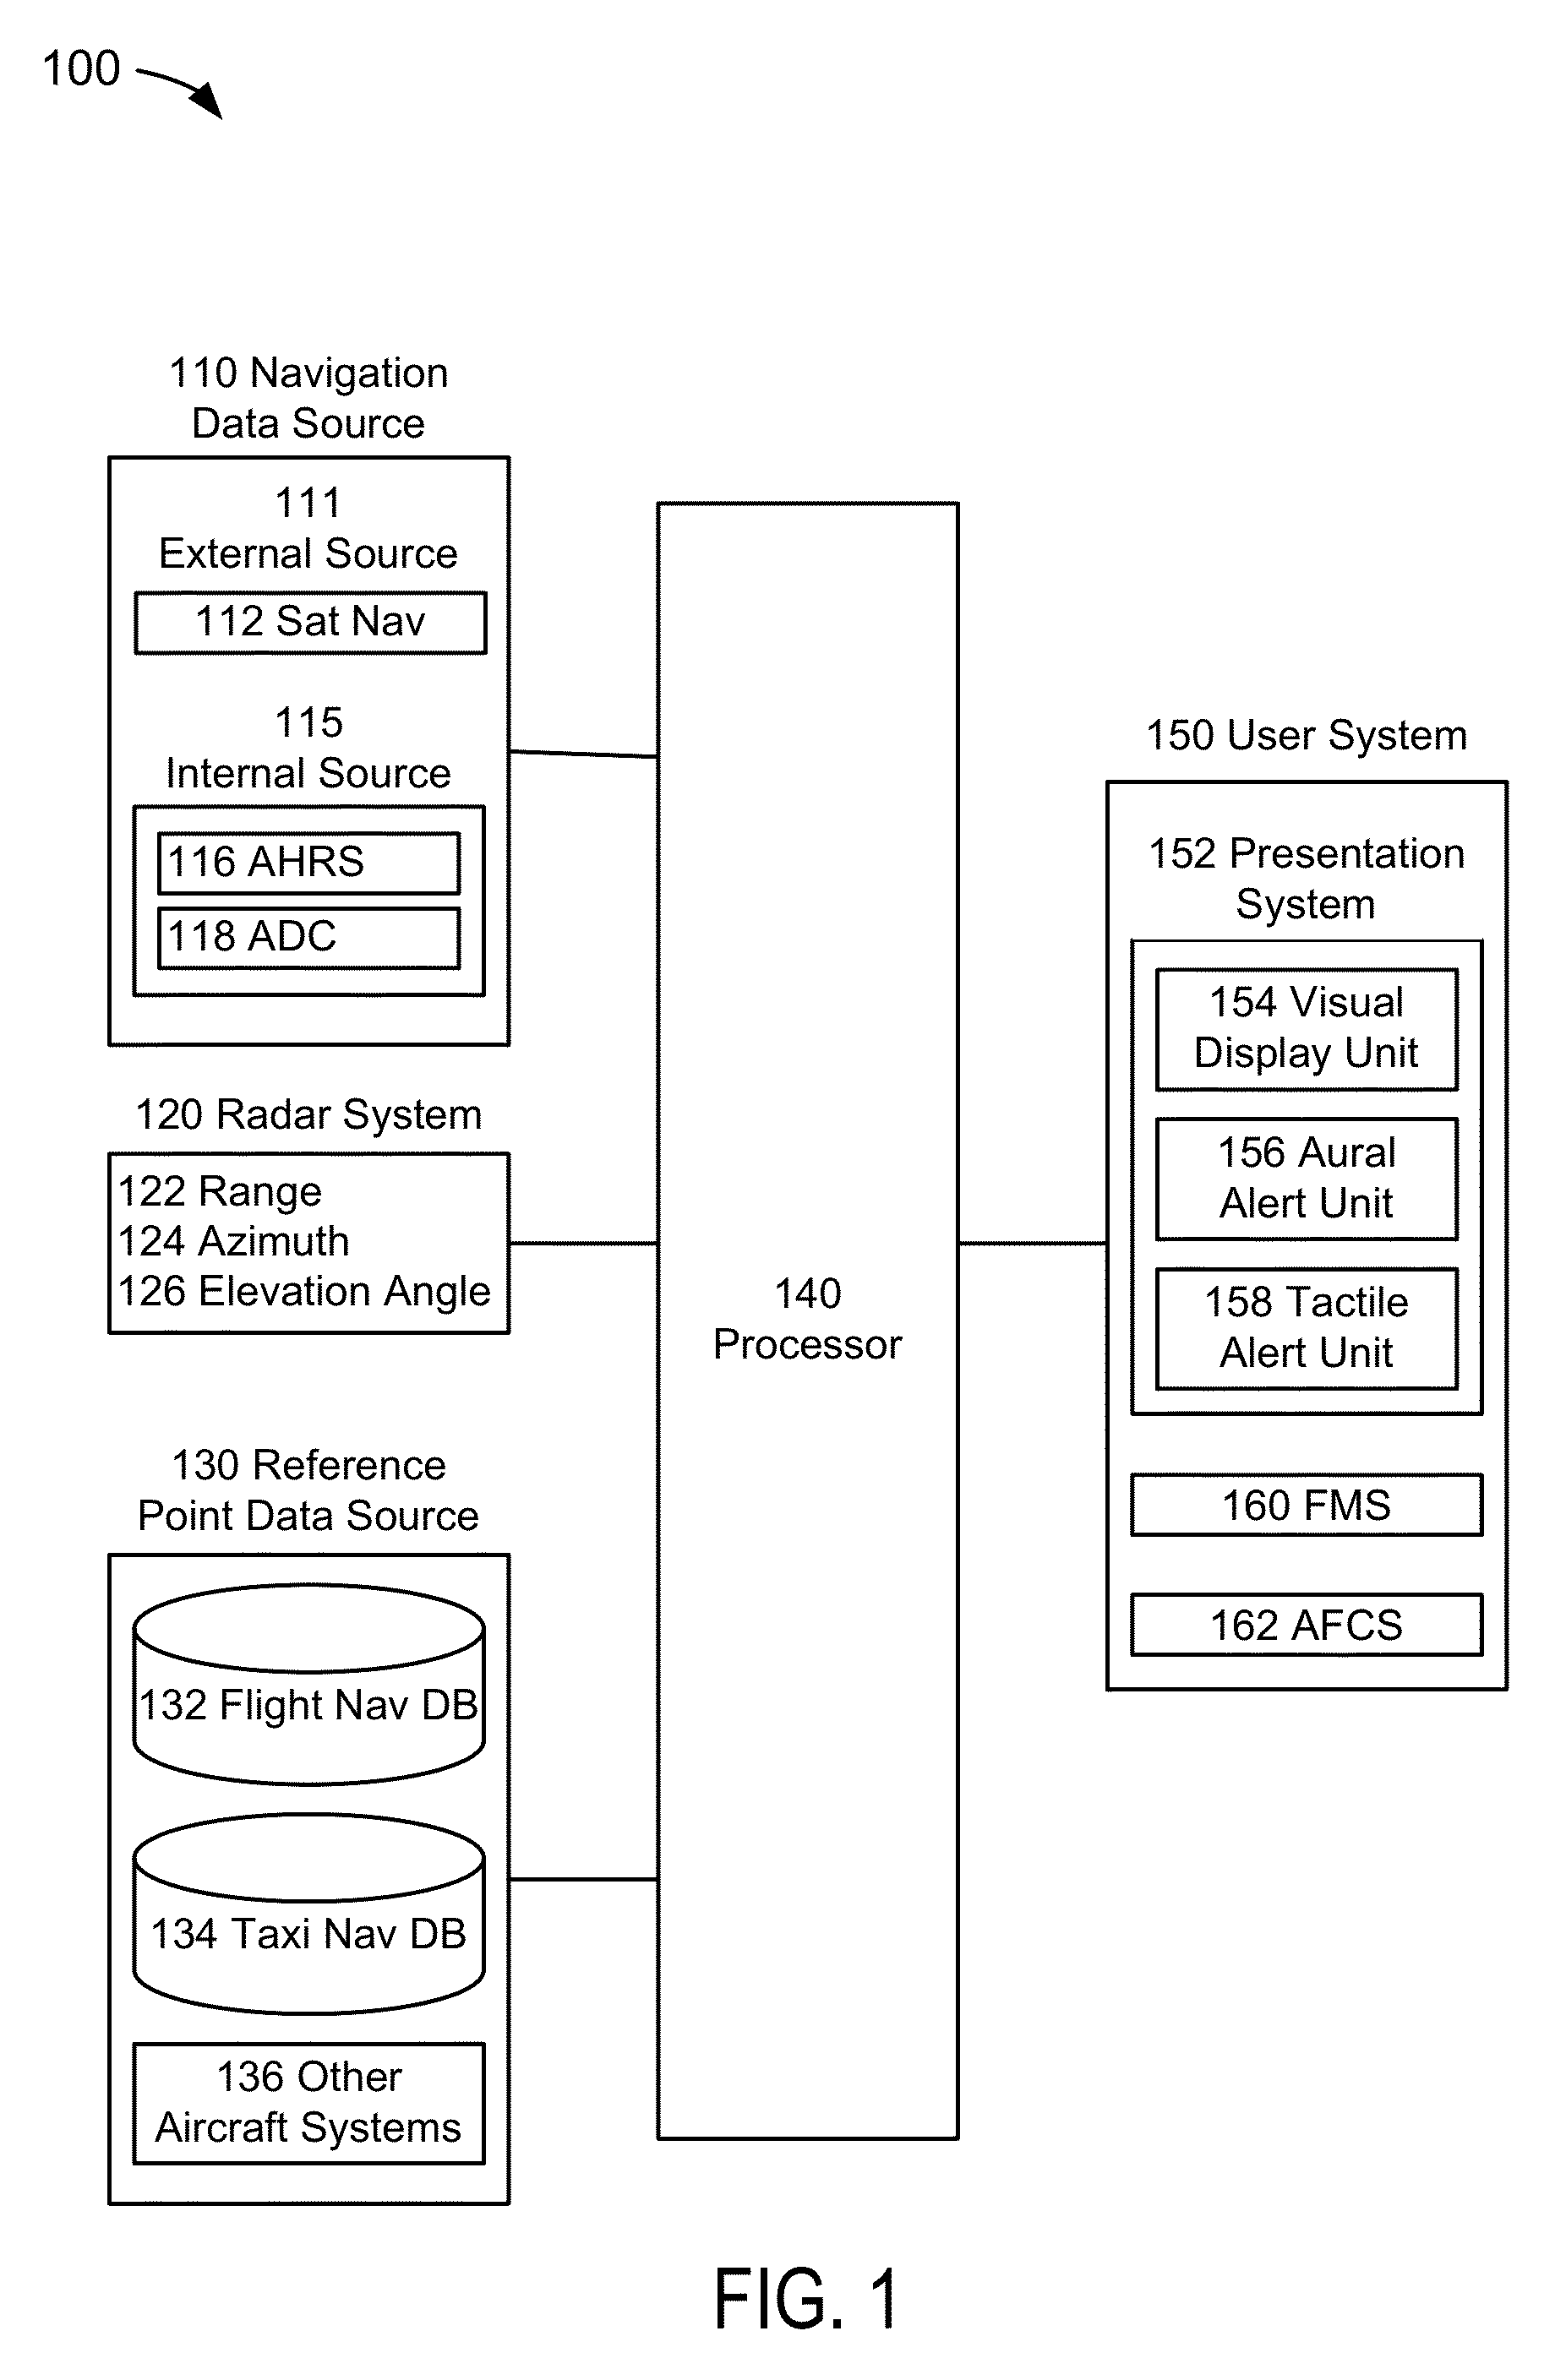 Systems and methods for generating aircraft height data and employing such height data to validate altitude data